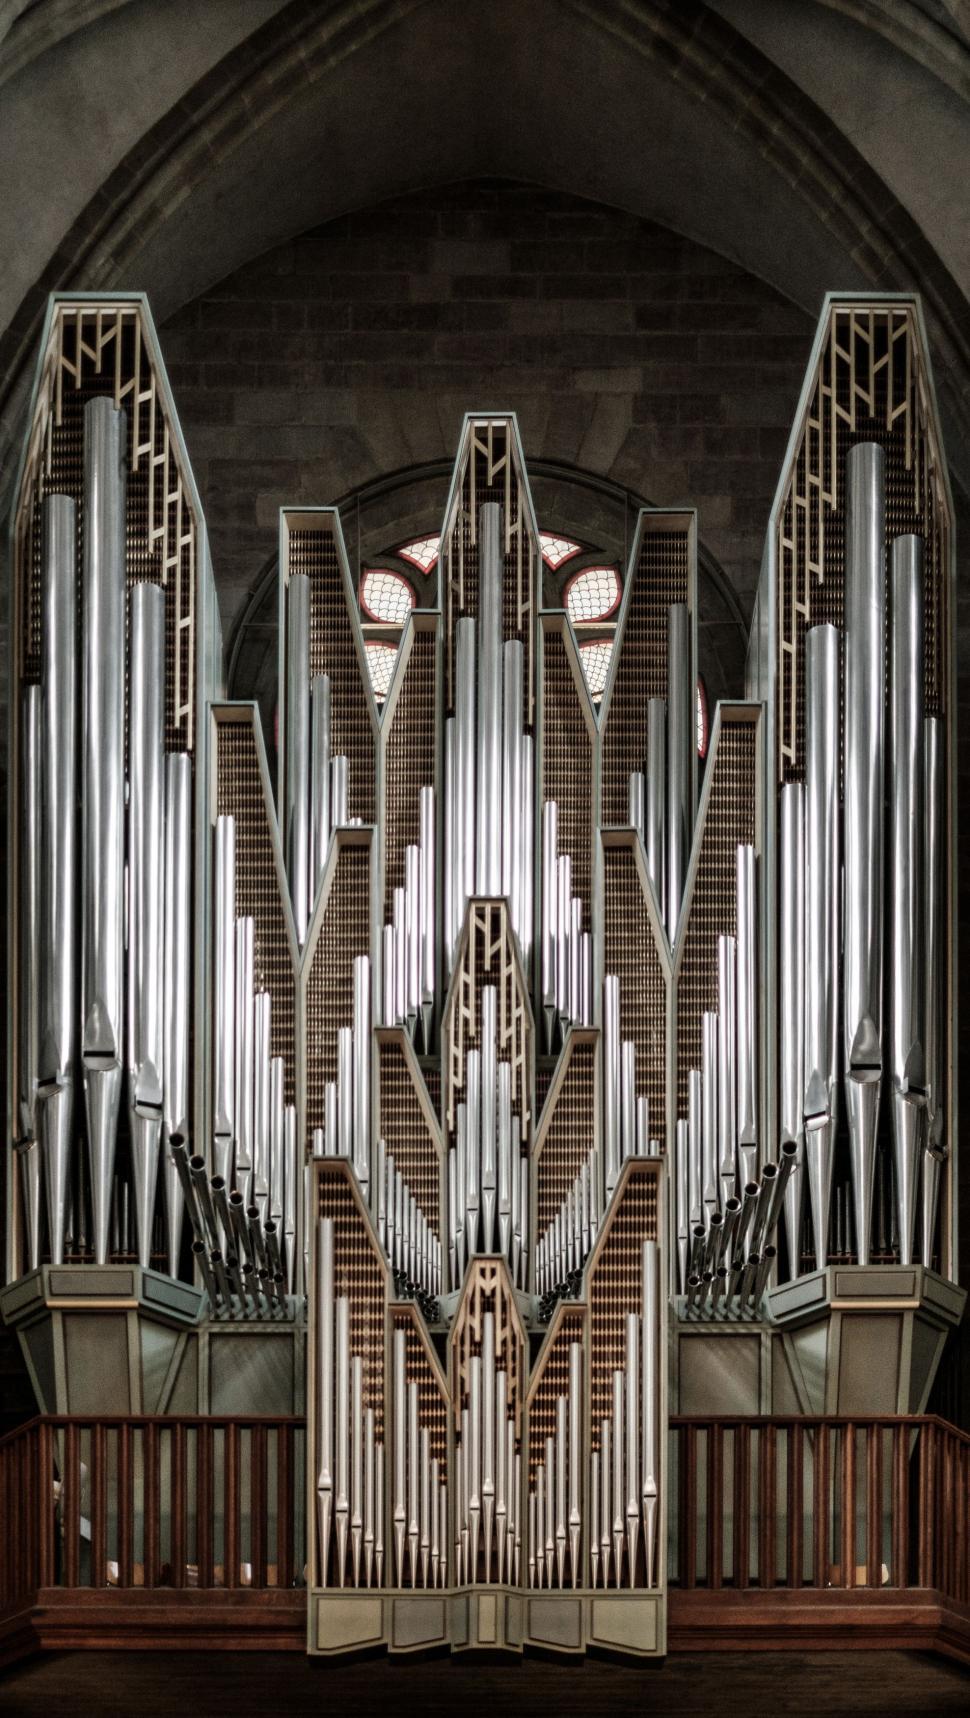 Free Image of Majestic Pipe Organ in Historic Building 